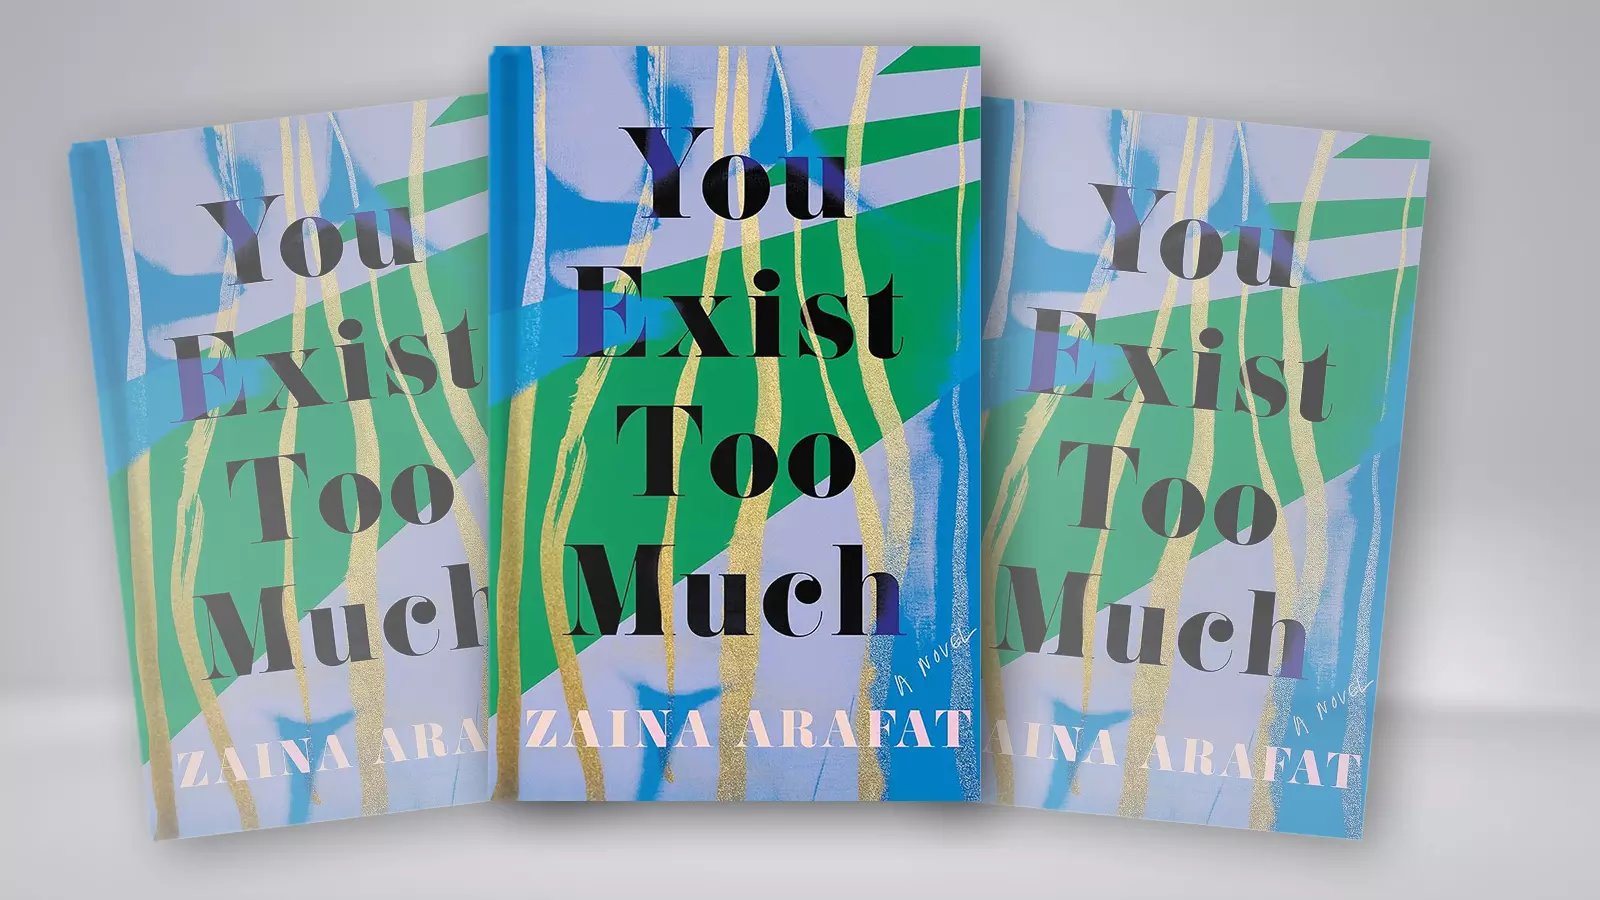 Zaina Arafats debut novel, You Exist Too Much,tells the story of an unnamed young Palestinian-American woman — caught between cultural, religious, and sexual identities.